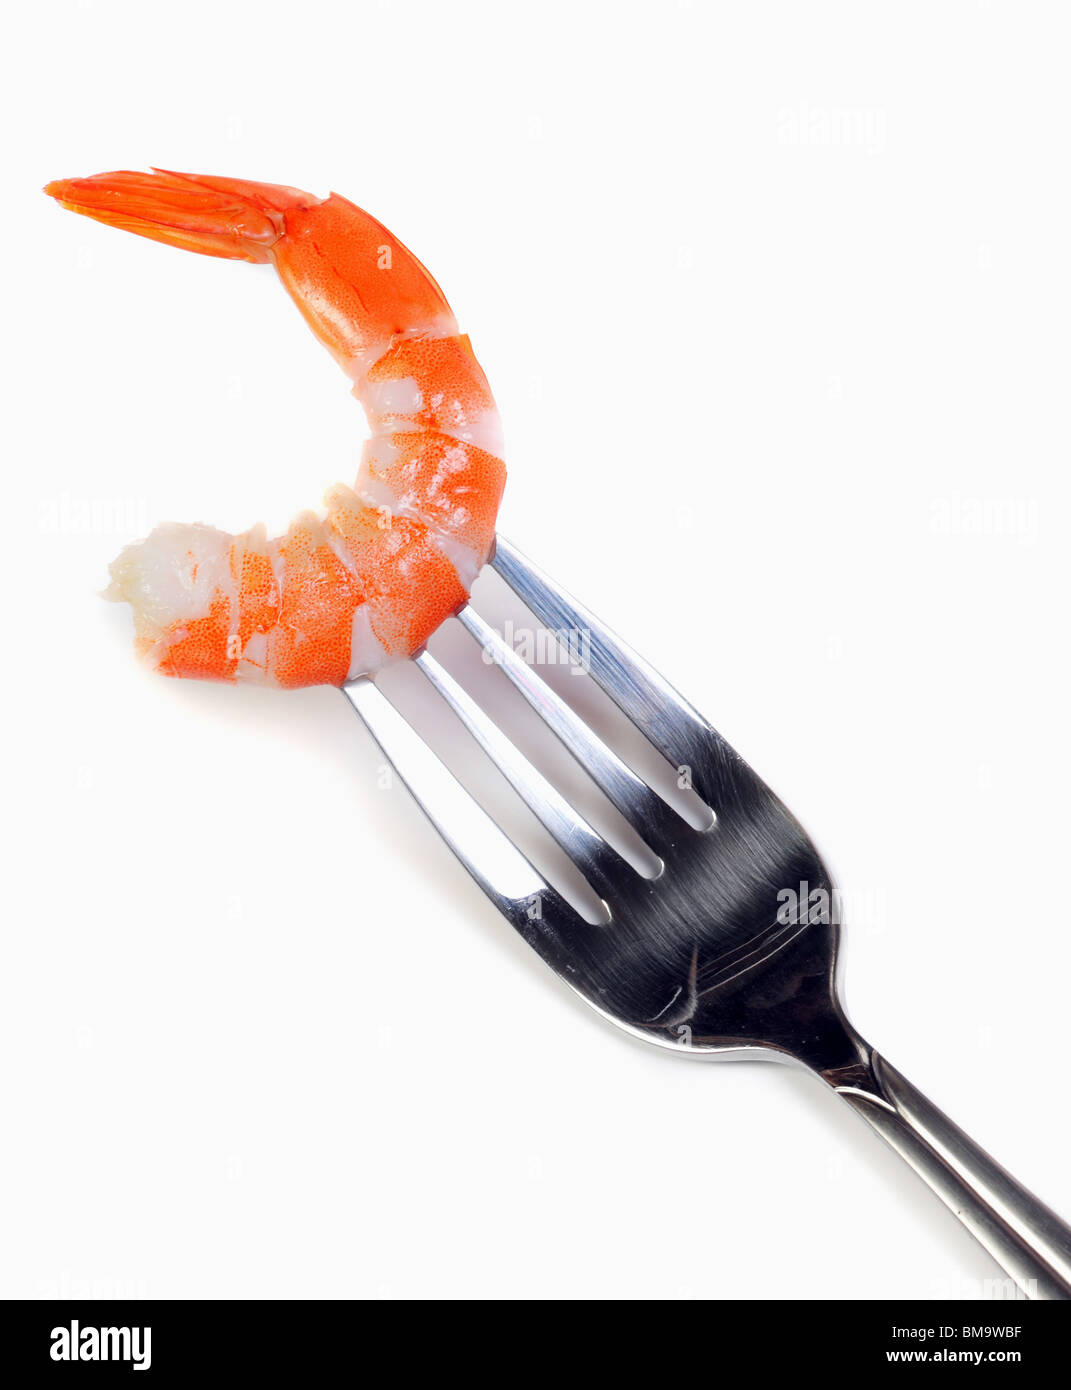 Single shrimp tail on a fork over white background Stock Photo